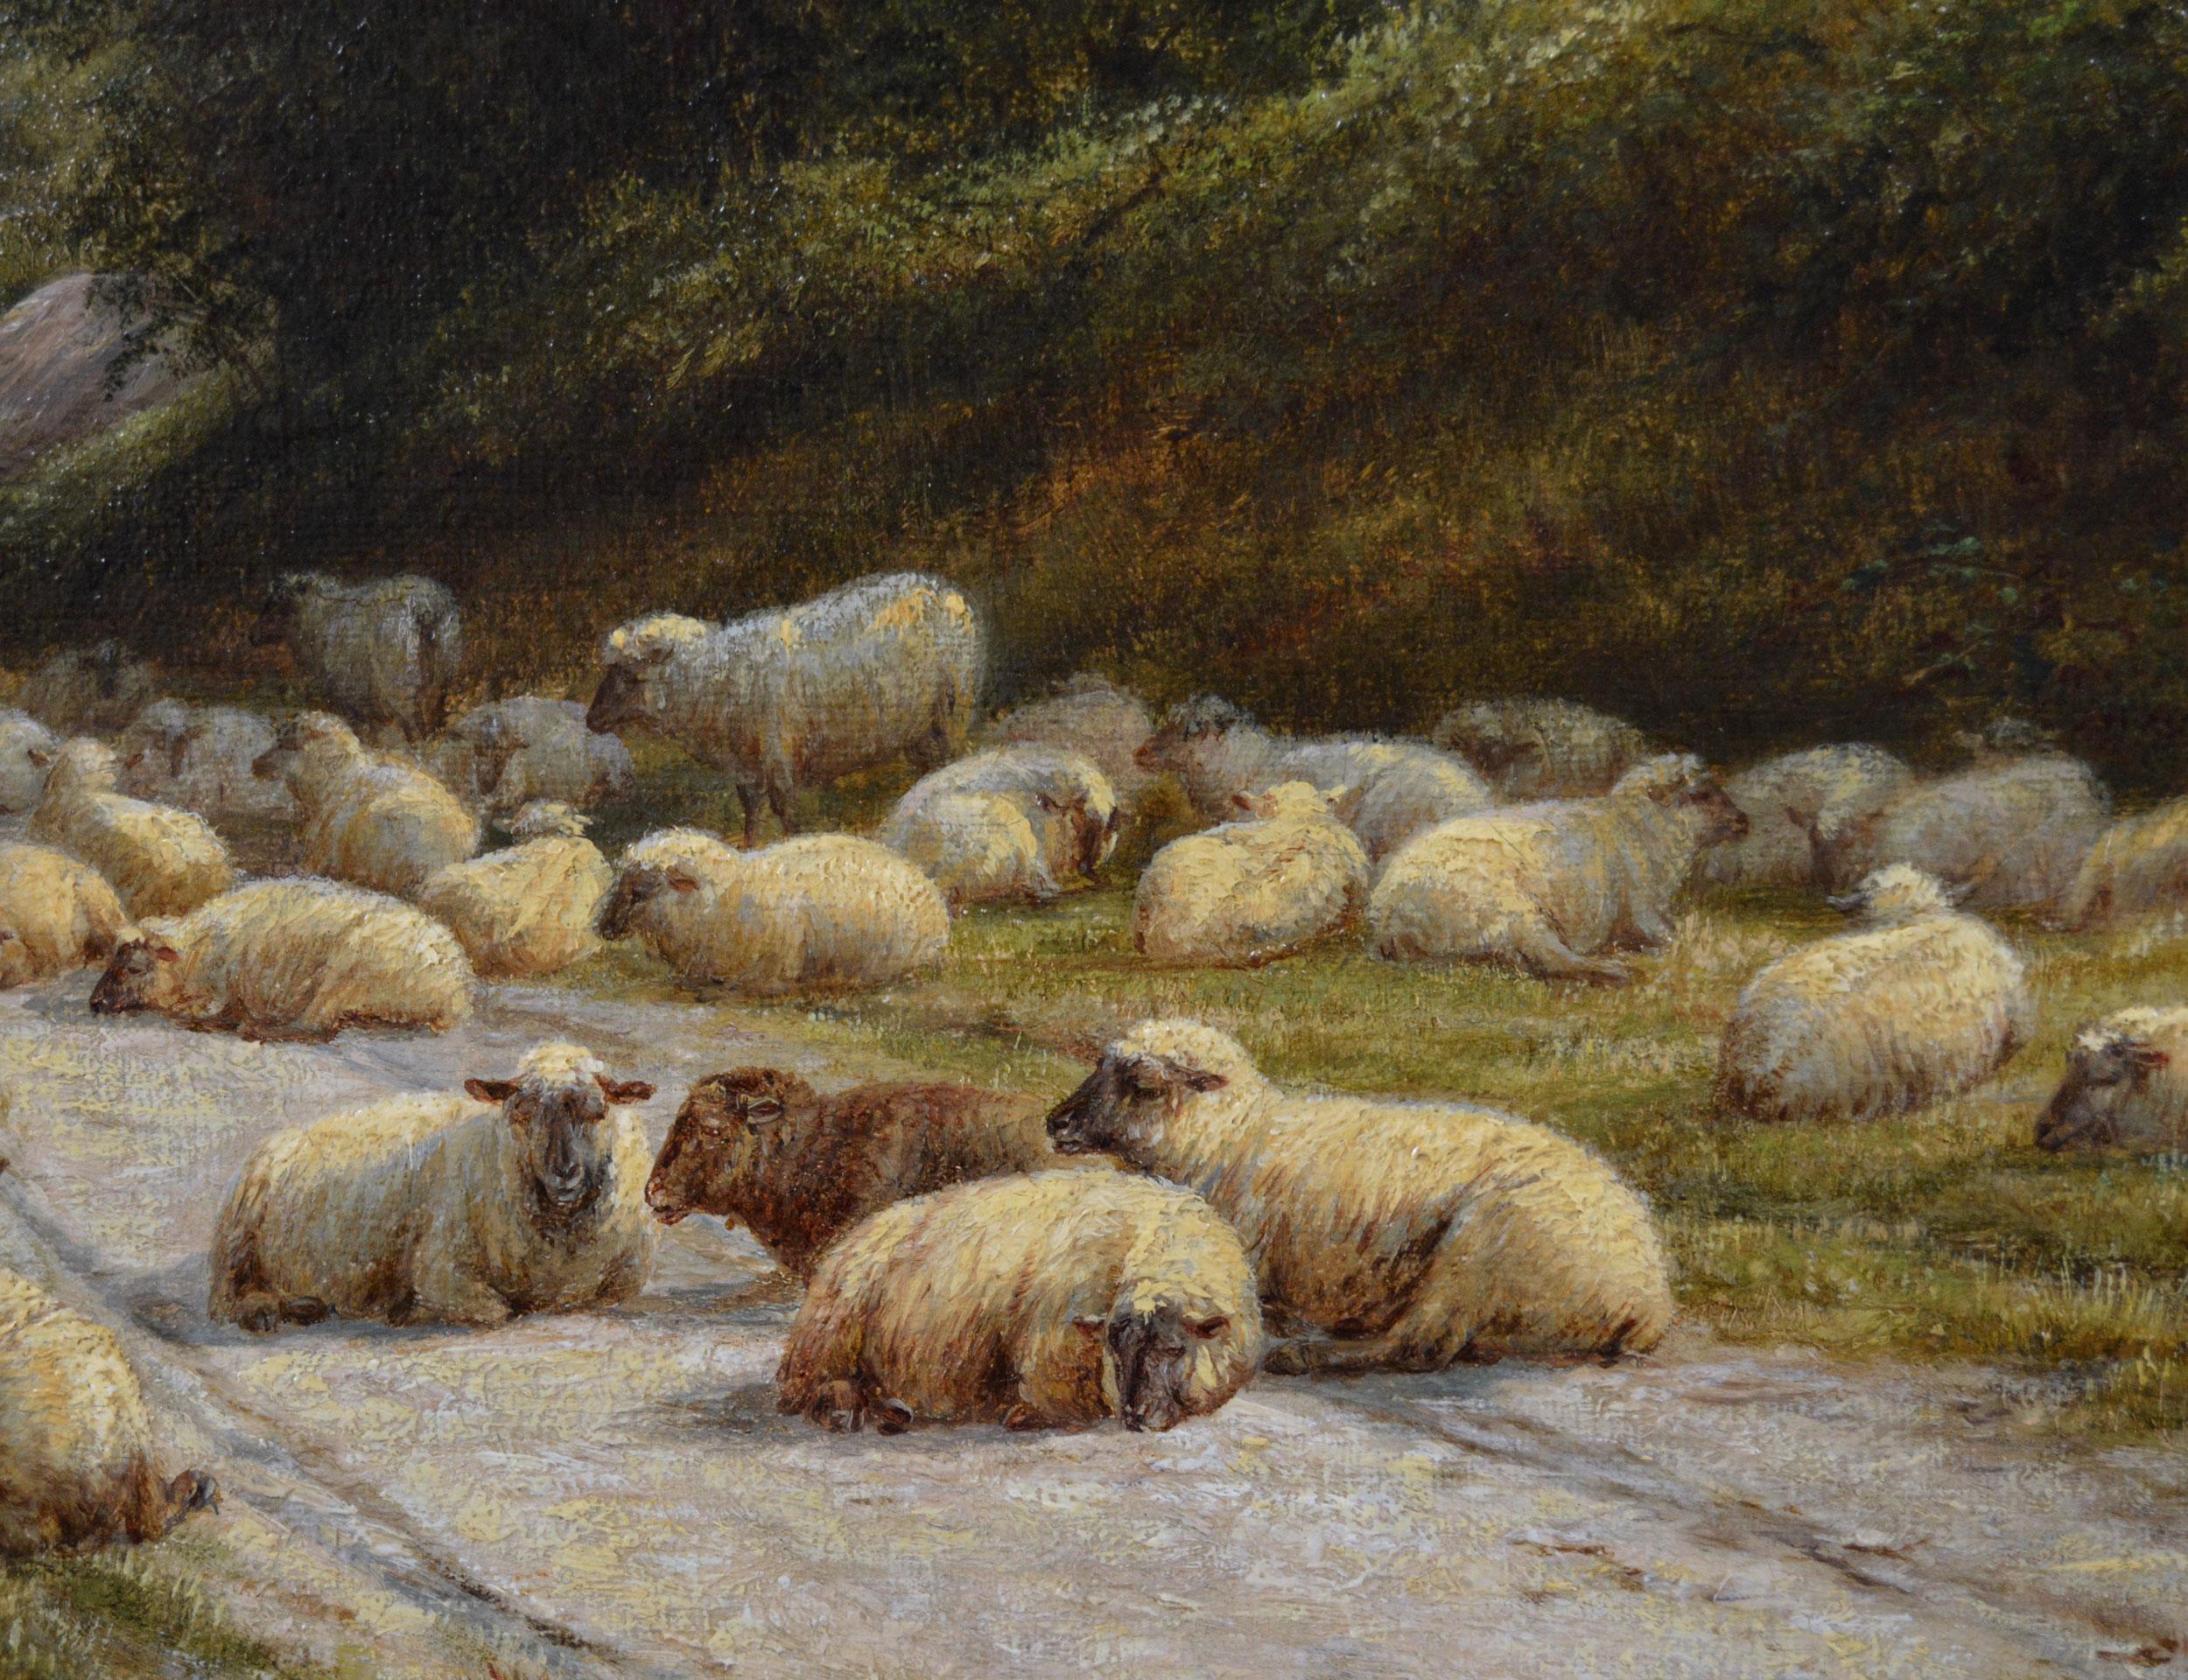 19th Century landscape oil painting of sheep in a Sussex lane  - Victorian Painting by William Luker Sr.